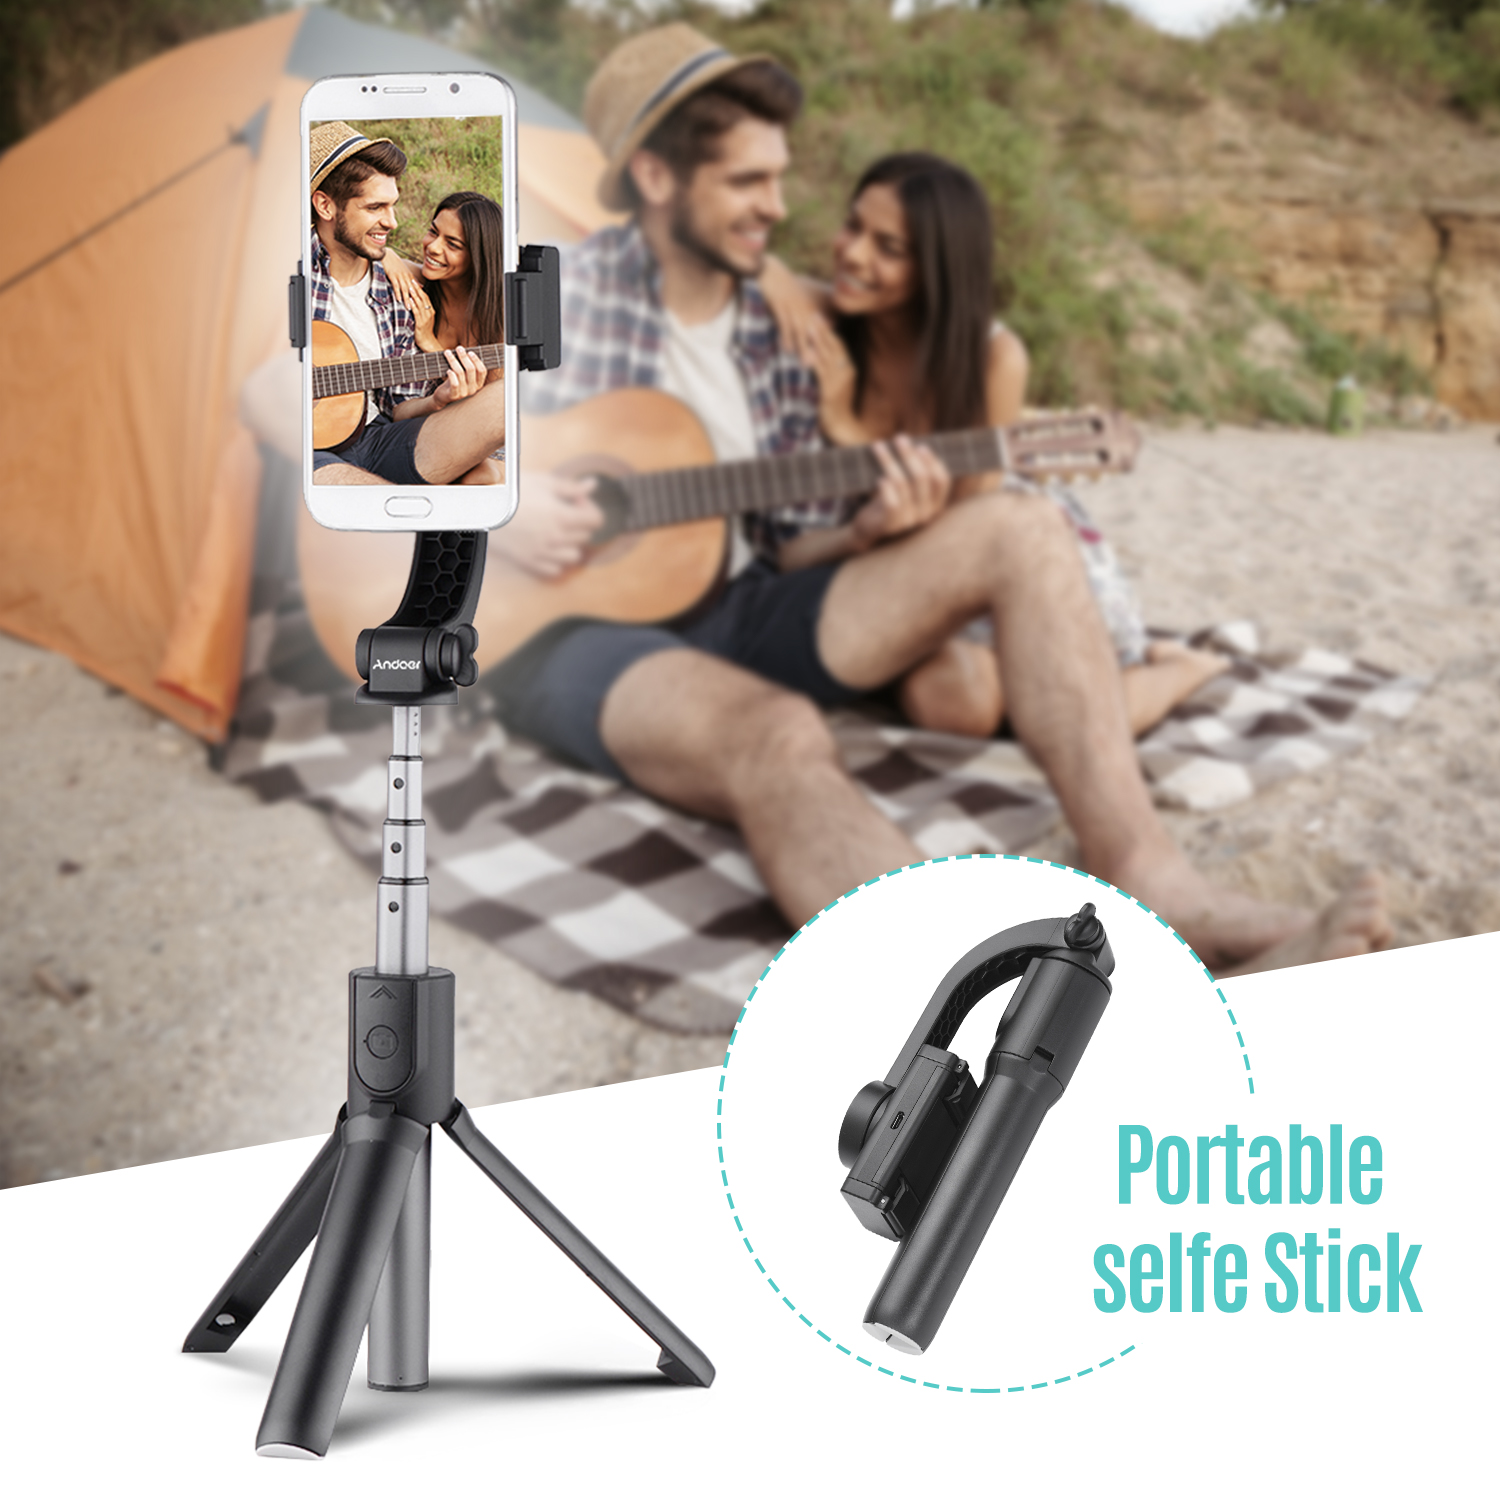 Andoer 3-in-1 Extendable Smartphone Gimbal Stabilizer + Selfie Stick + Tripod Stand for Live Vlogging Video for Smartphones